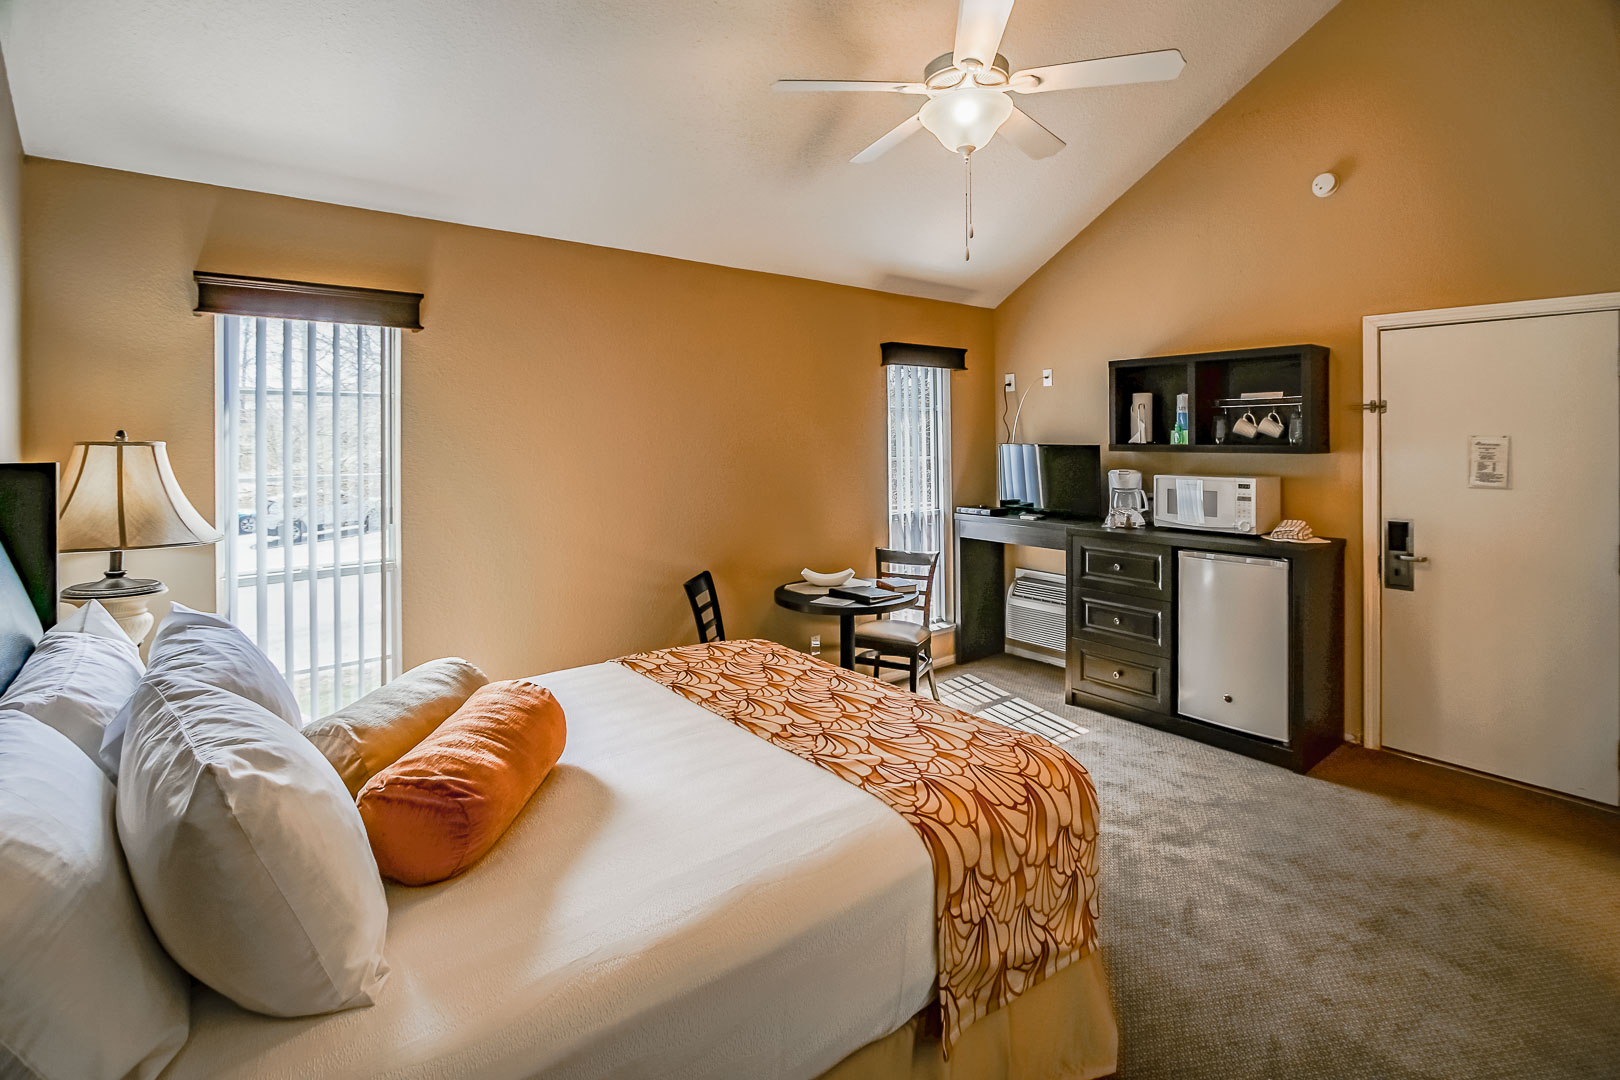 A bedroom with partial kitchen at The Townhouses Resort in Branson, Missouri.